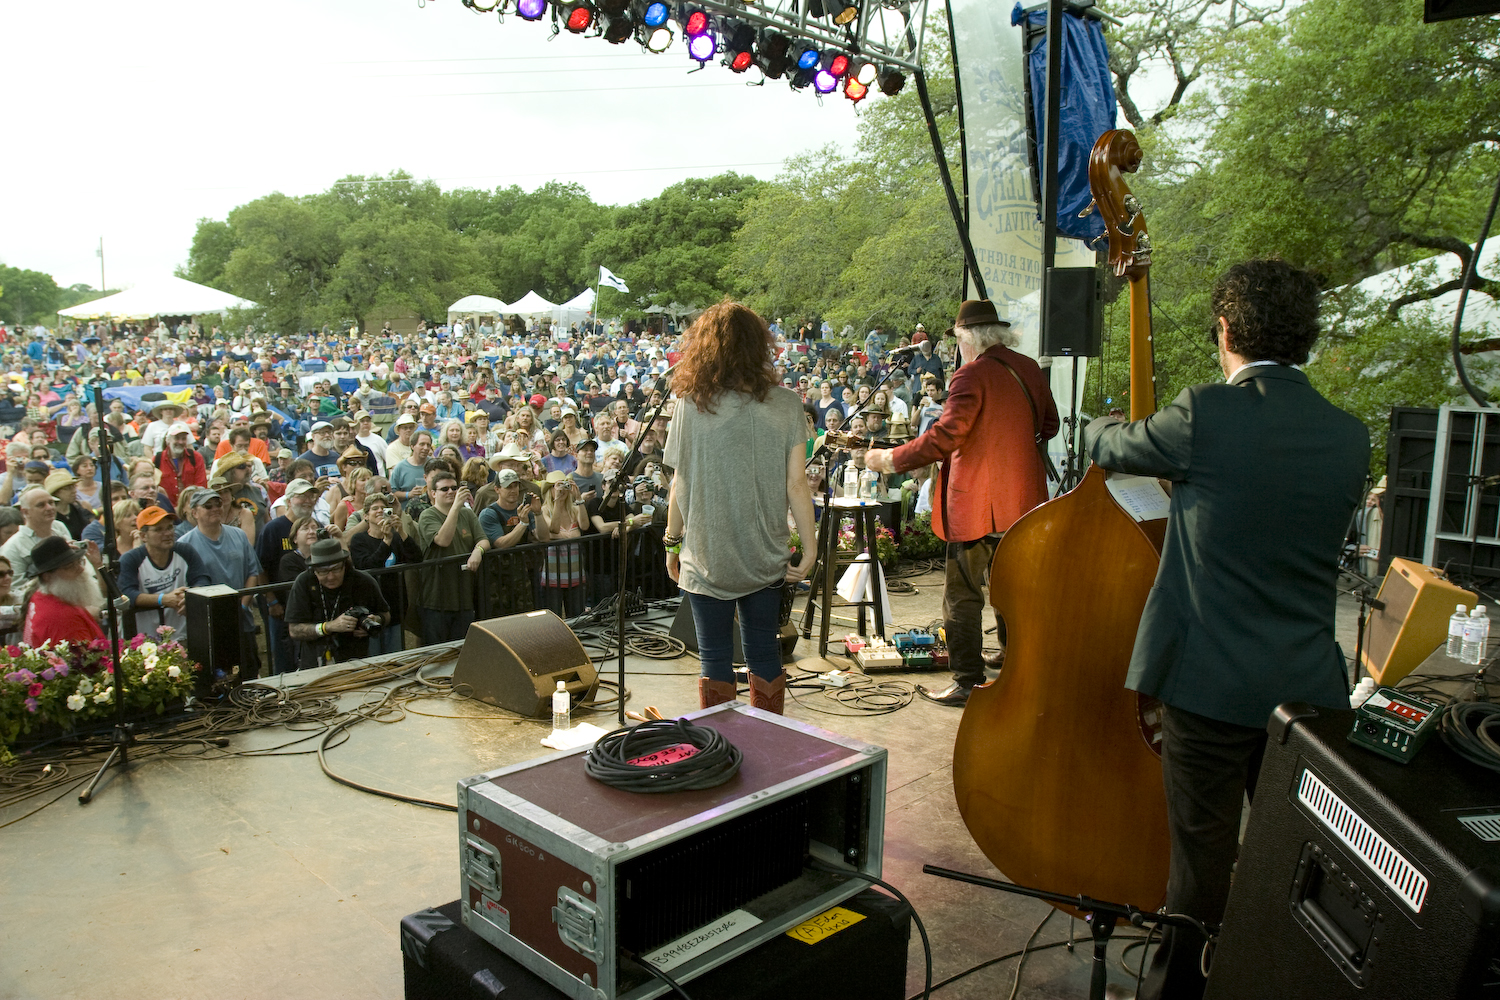 Guitarist, double bassist and singer on stage facing large audience